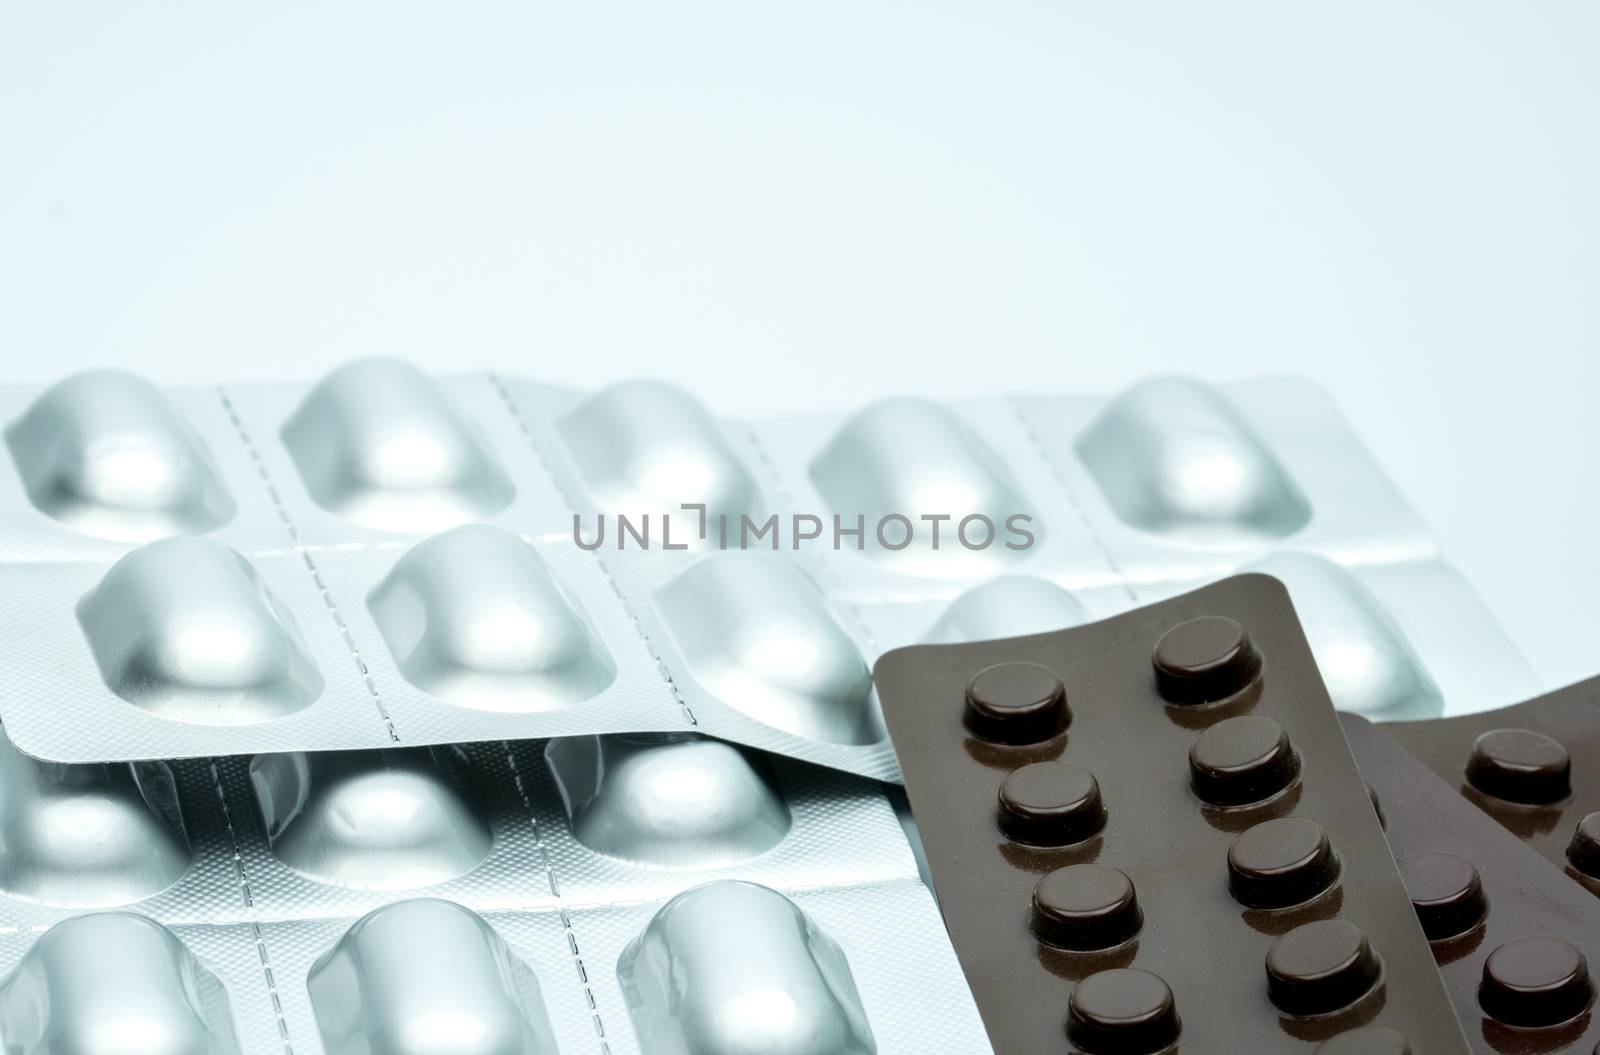 Silver aluminium blister pack and brown blister pack for light resistance packaging to protect drug degradation. Tablet pills packaging isolated on white background. Pharmaceutical industry. Pharmacy background. Global healthcare. Health budgets and policy concept.